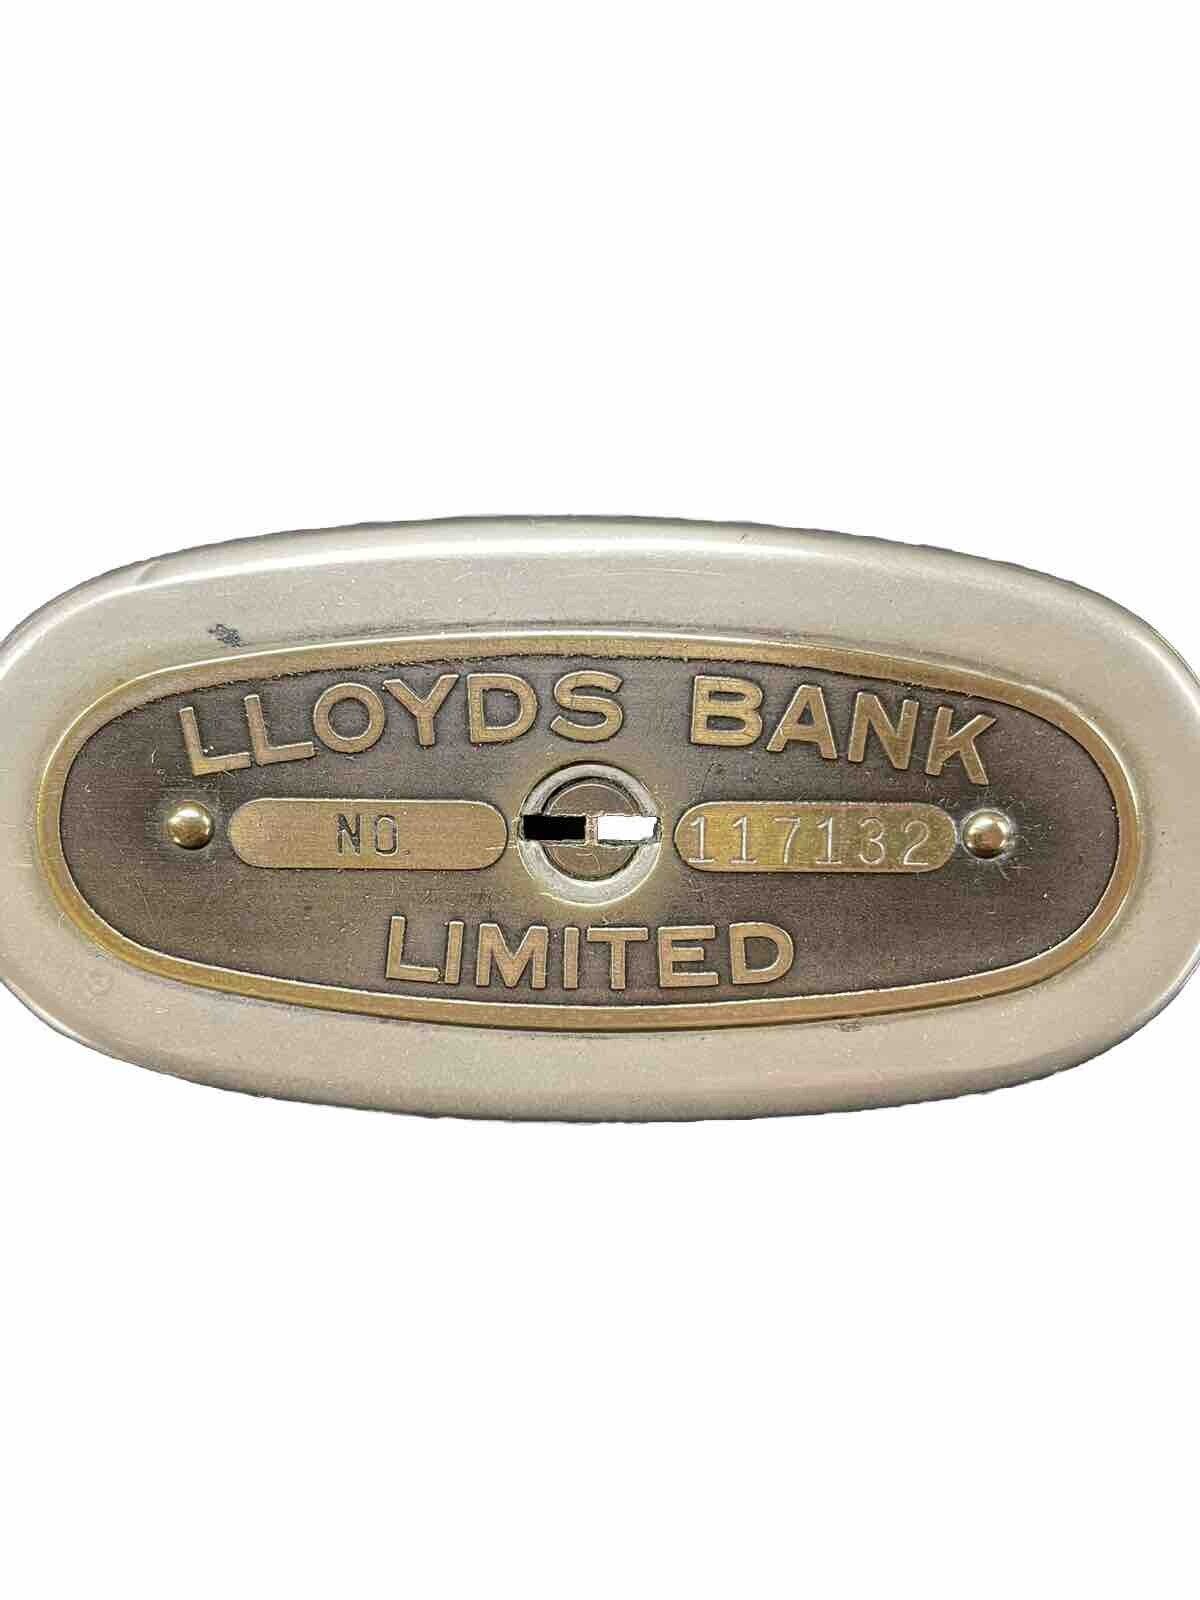 Vintage Lloyds Bank Limited Oval Coin Bank for Shilling Pence & Crowns ~ NO Key